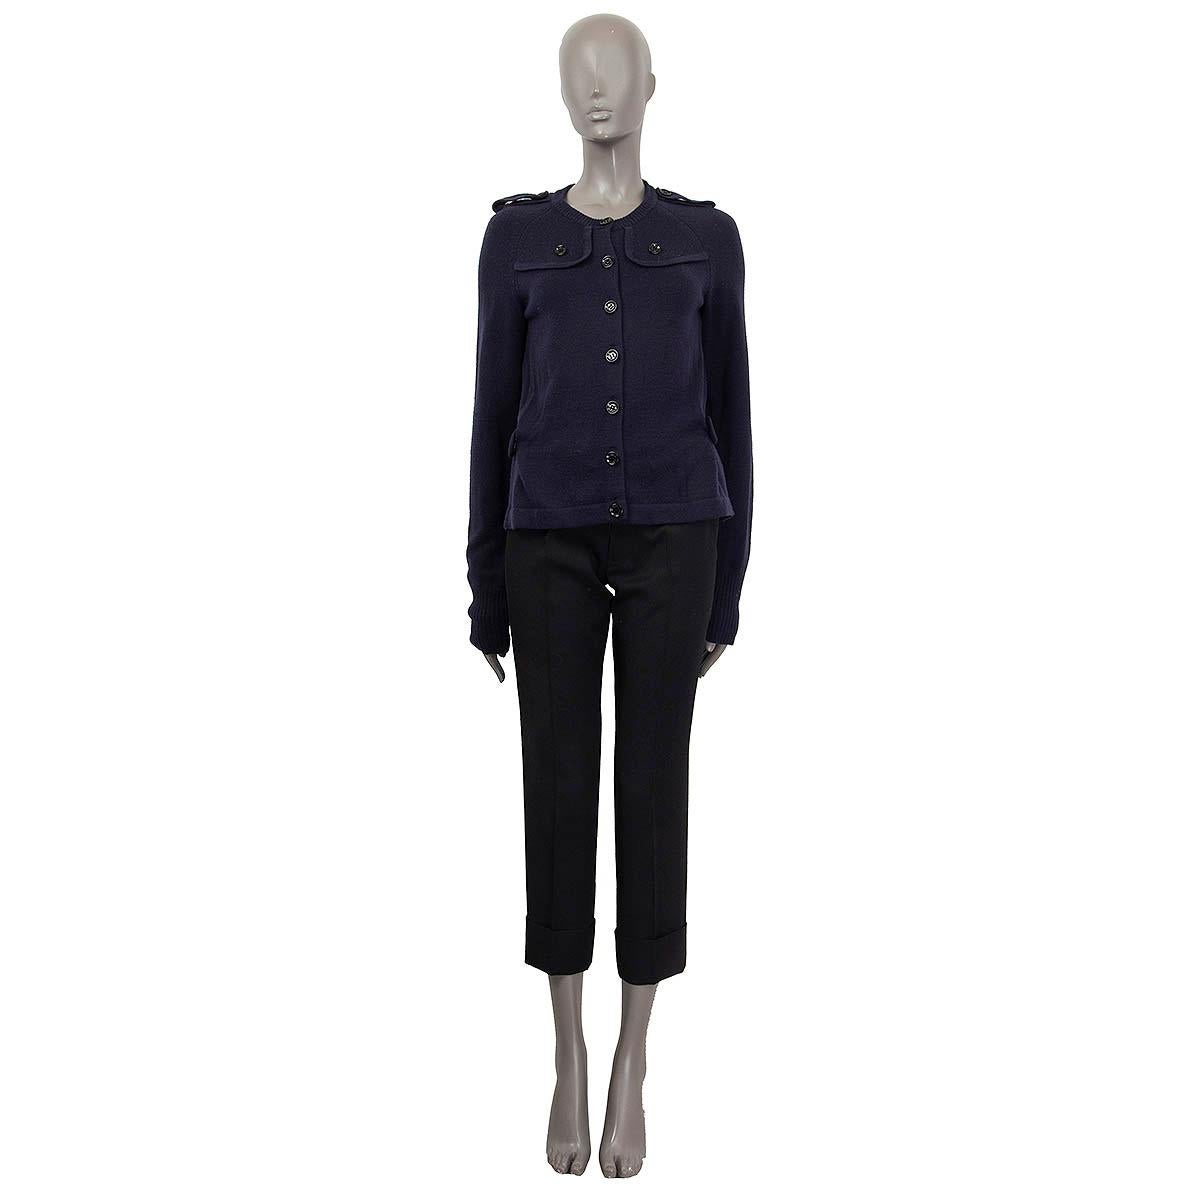 100% authentic Burberry London cardigan in navy blue wool (85%) and cashmere (15%). Features epaulettes on the shoulders, ruffles and a detachable belt on the back. Has long raglan sleeves (sleeve measurements taken from the neck). Opens with with